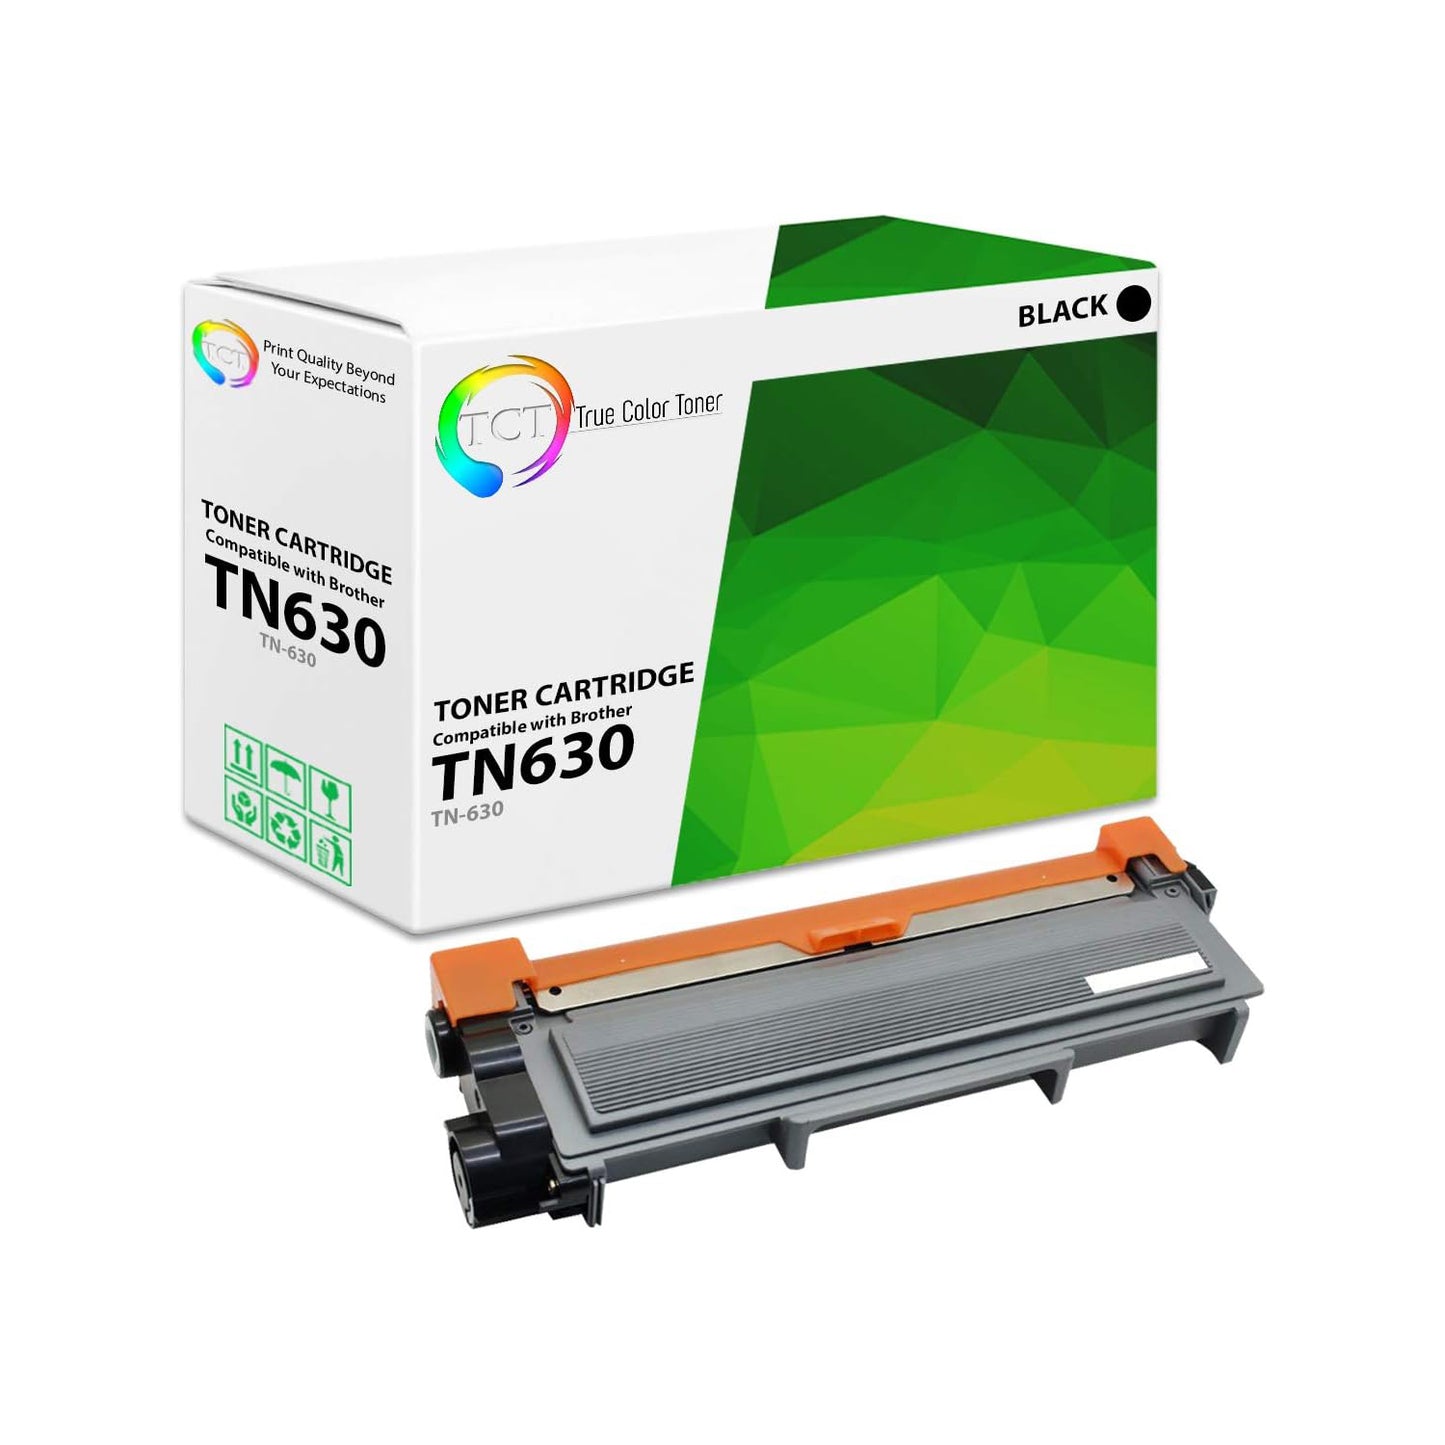 TCT Compatible Toner Cartridge Replacement for the Brother TN630 Series - 1 Pack Black